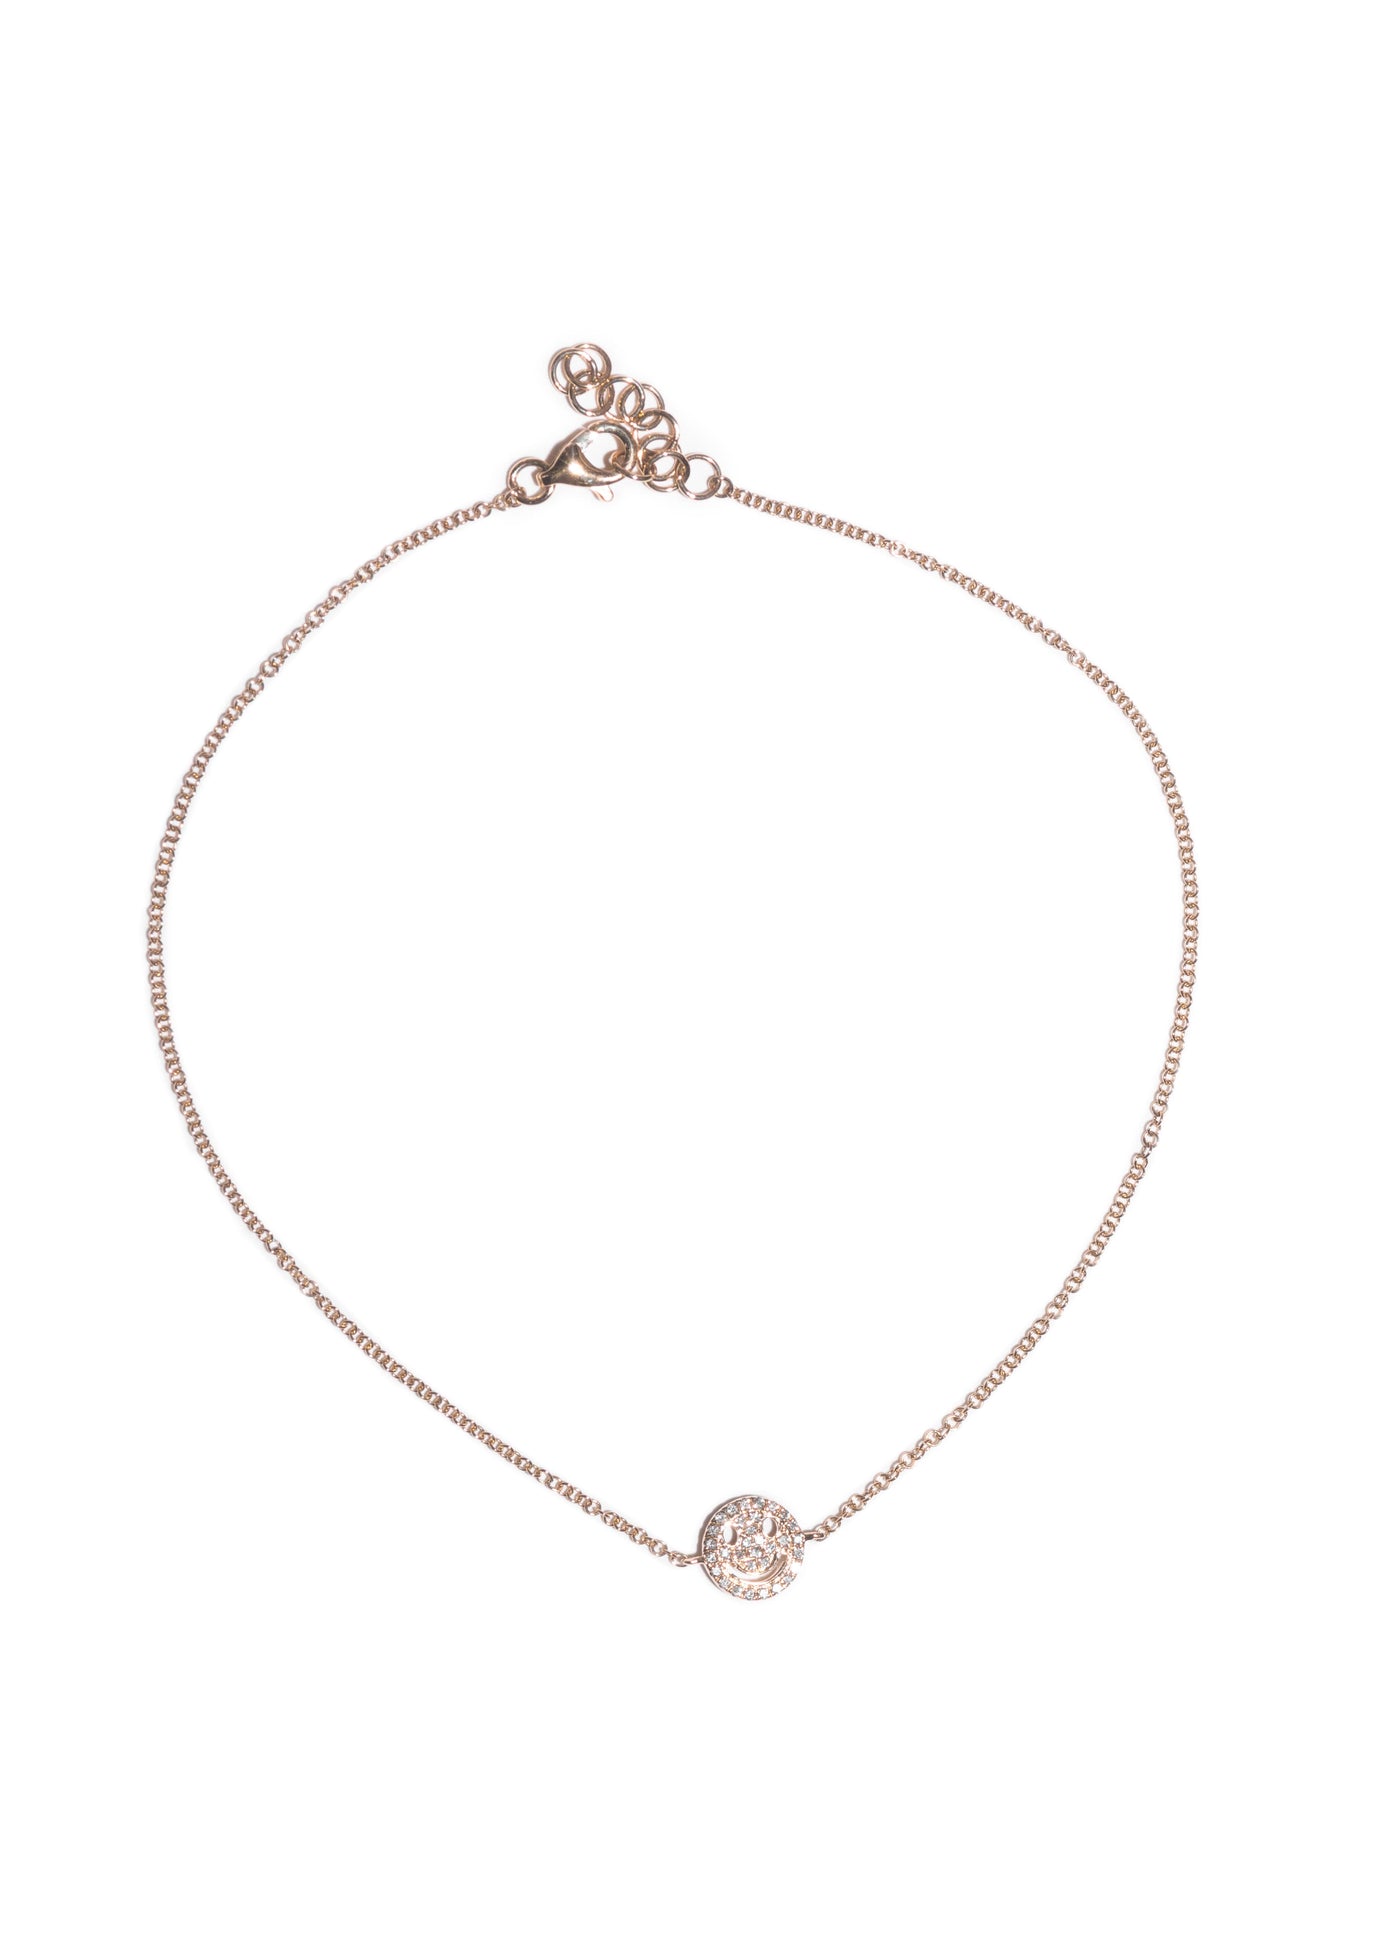 Smiley Face Anklet with Diamond Detail